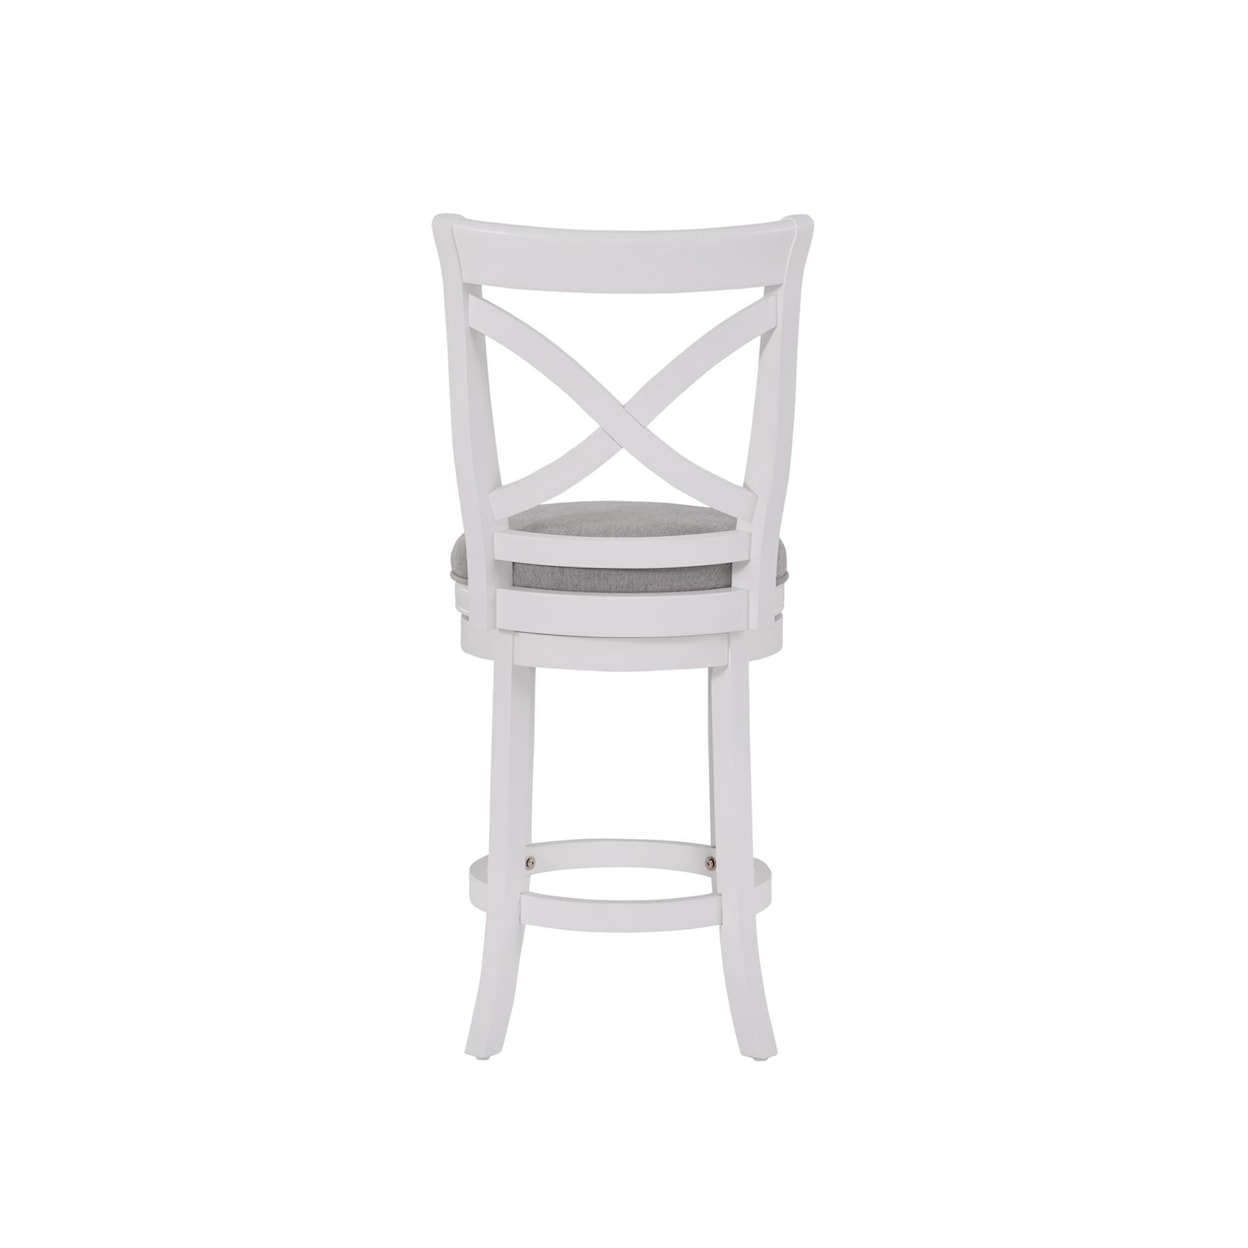 American Woodcrafters Wood Frame Barstools X-Back White Wooden Barstool